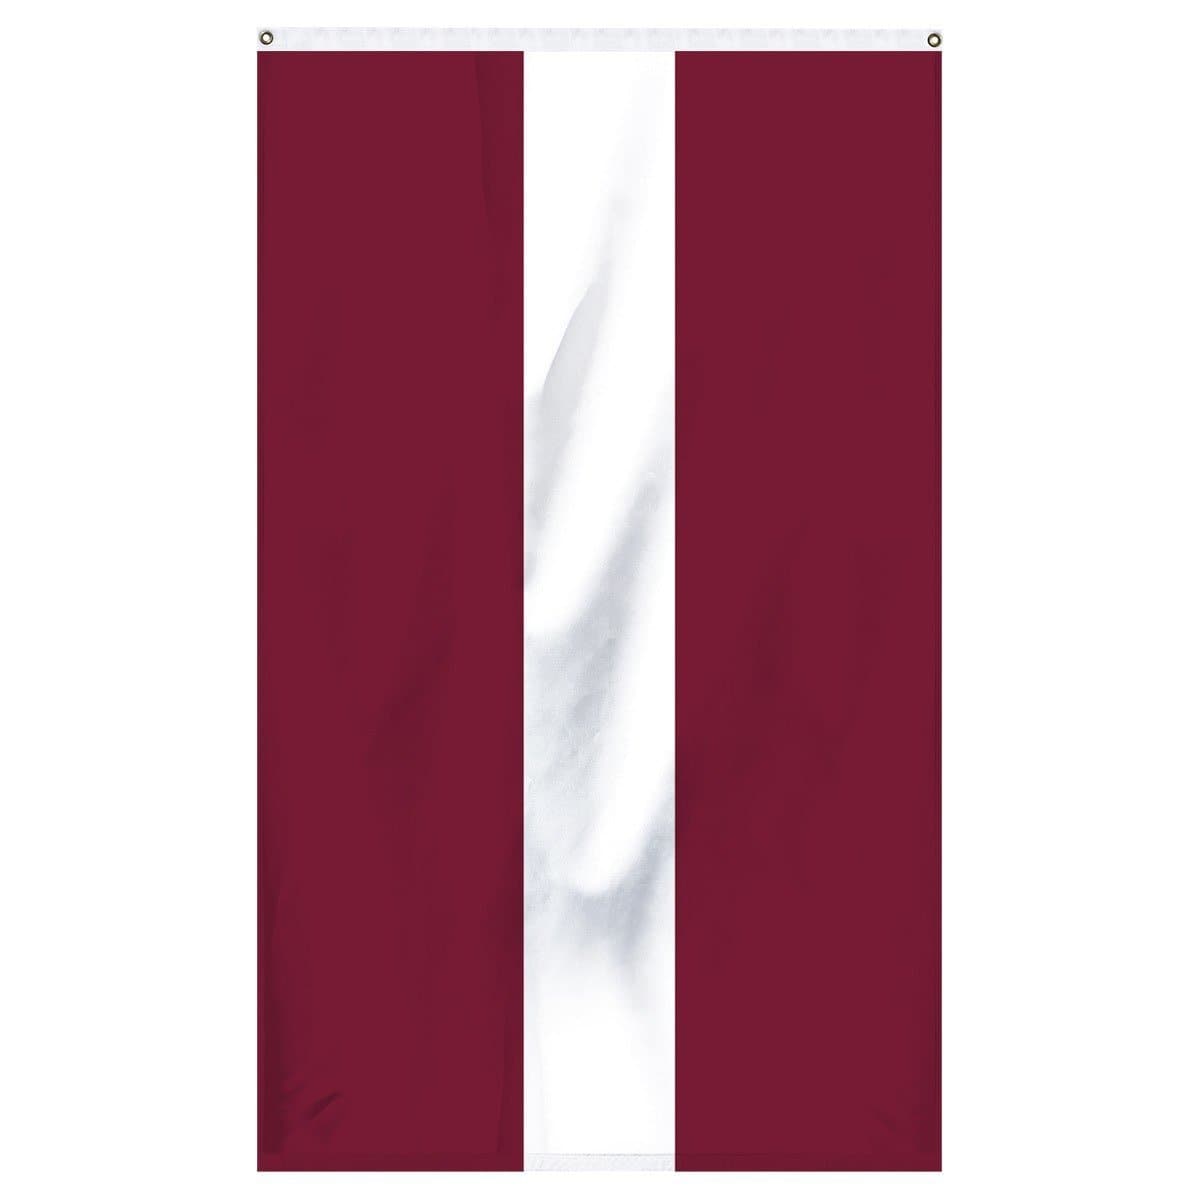 The national flag of Latvia for sale to buy online now from Atlantic Flag and Pole